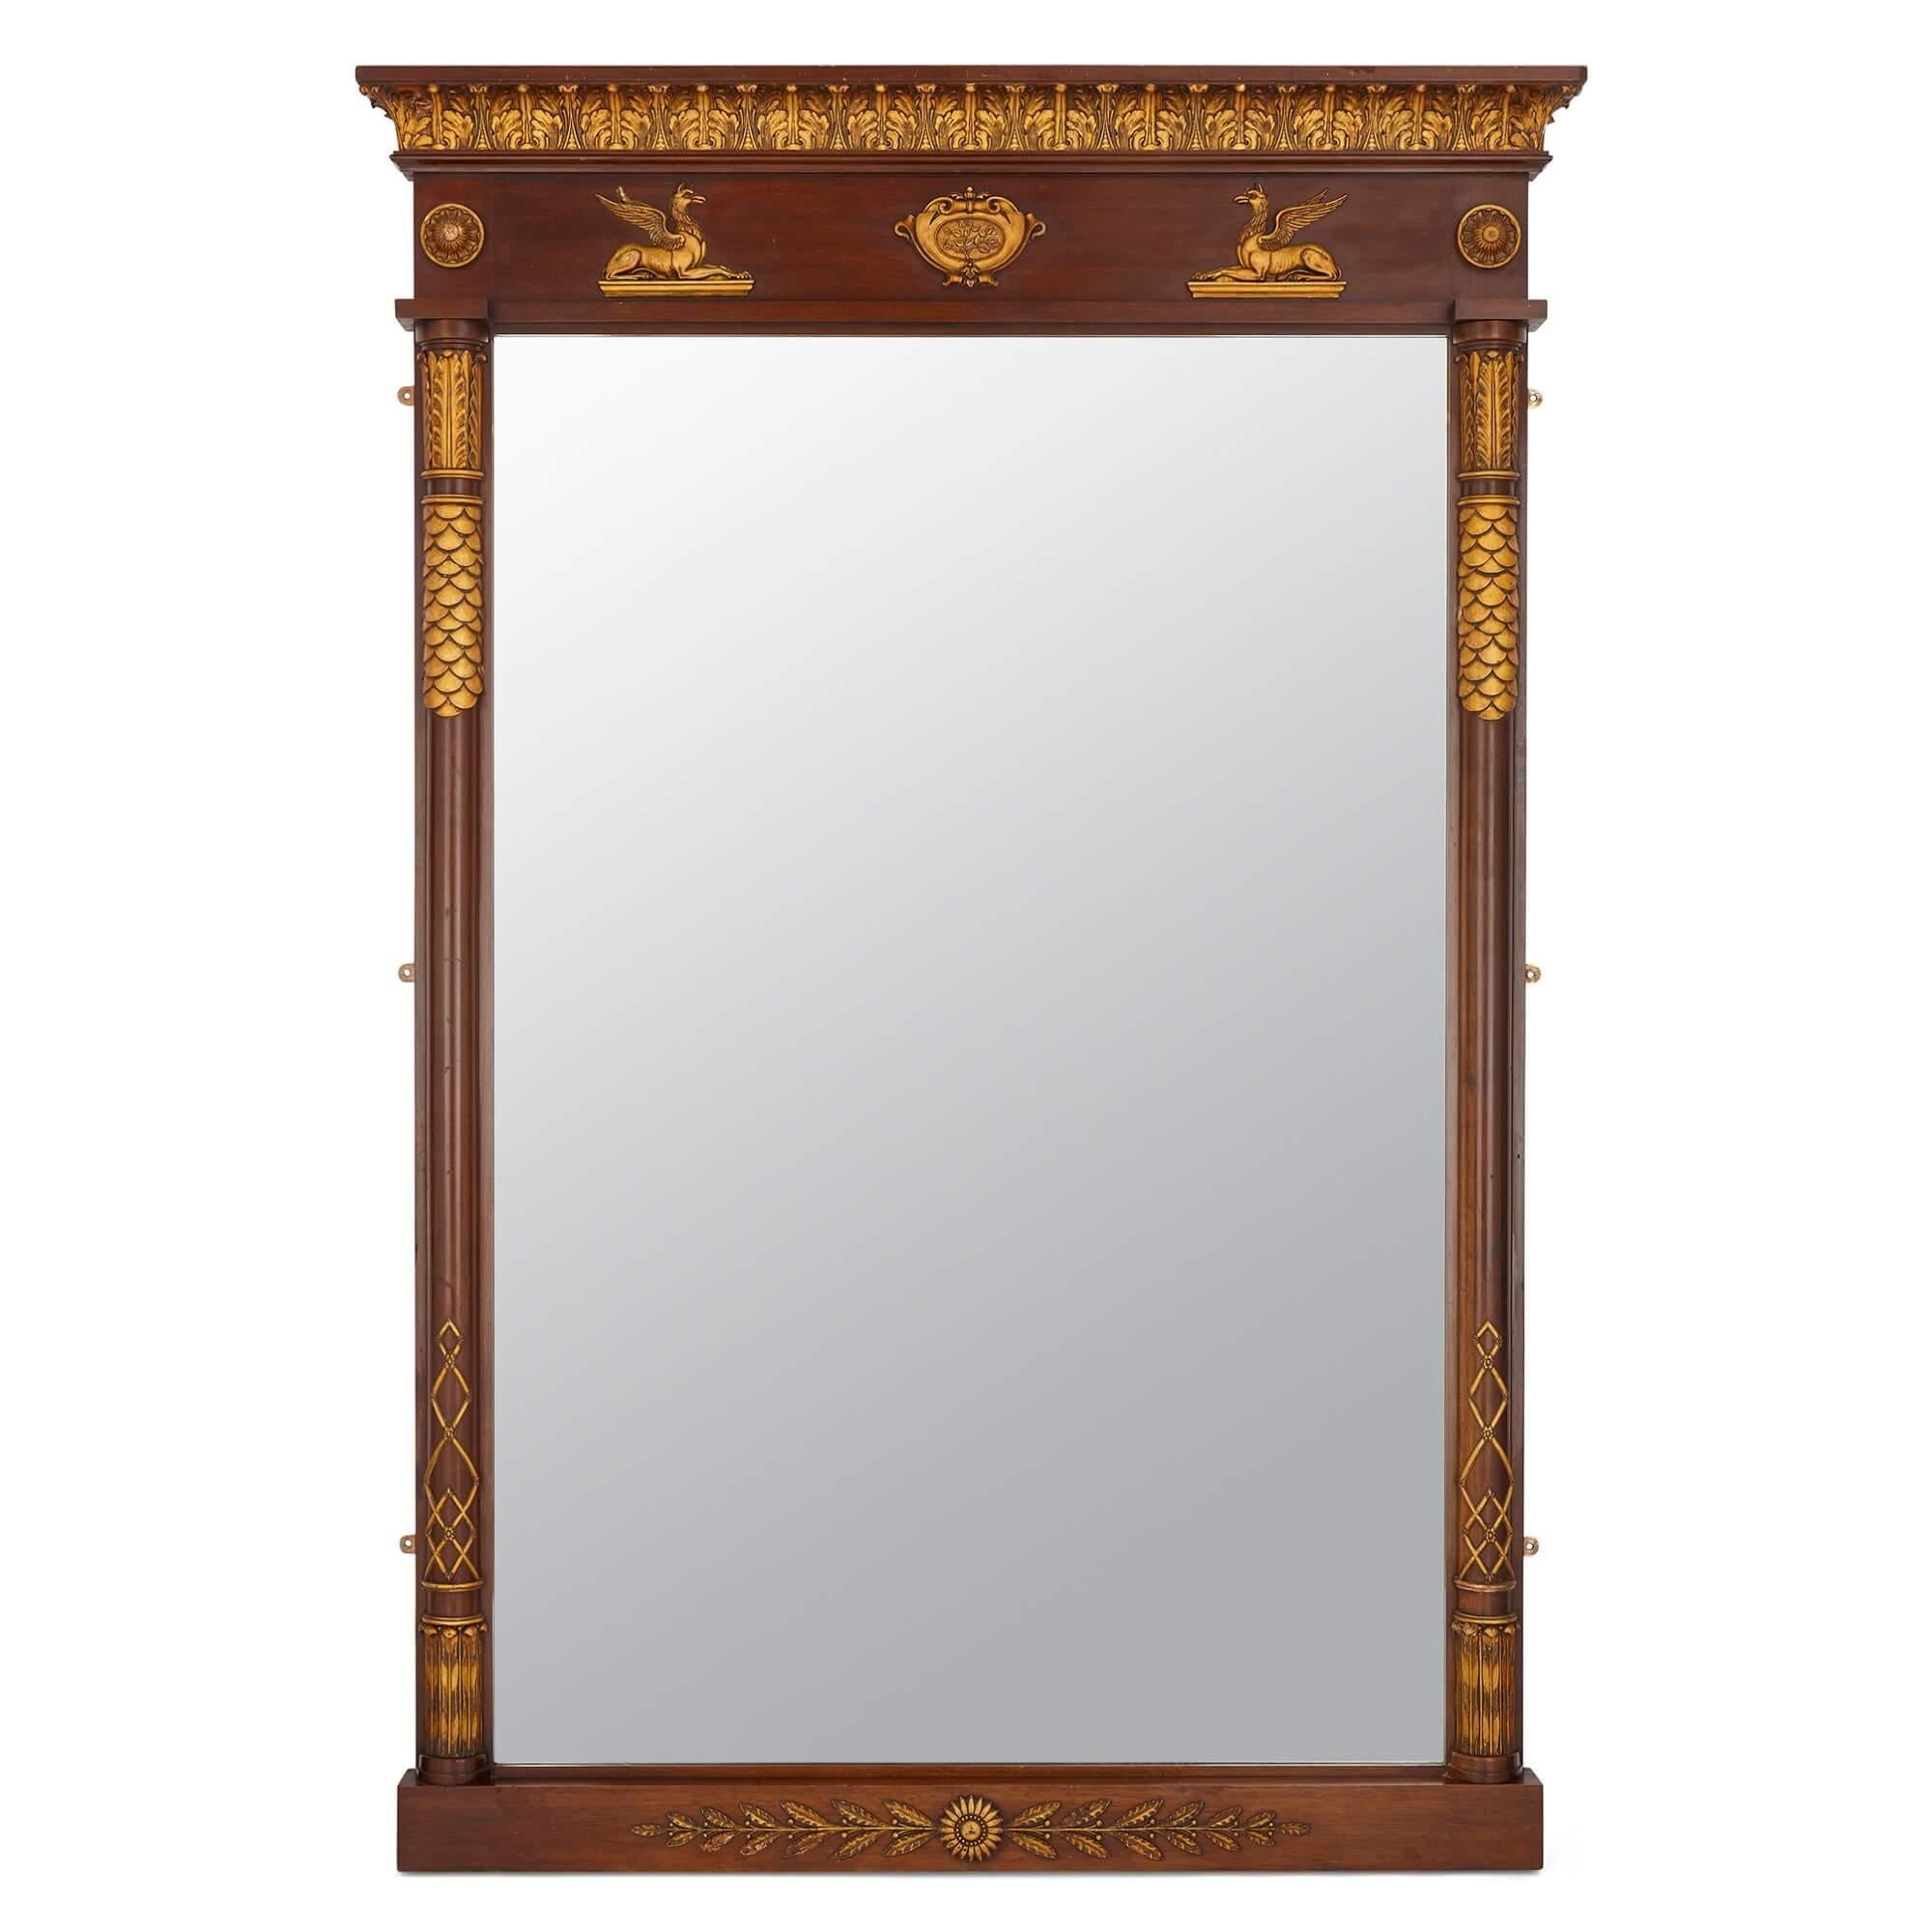 Two large English neoclassical carved wood mirrors
English, Late 19th Century
Height 229cm, width 155cm, depth 11cm

These exceptional, large Regency-style rectangular mirrors, sculpted from wood, radiate an exquisite blend of opulence and elegance.